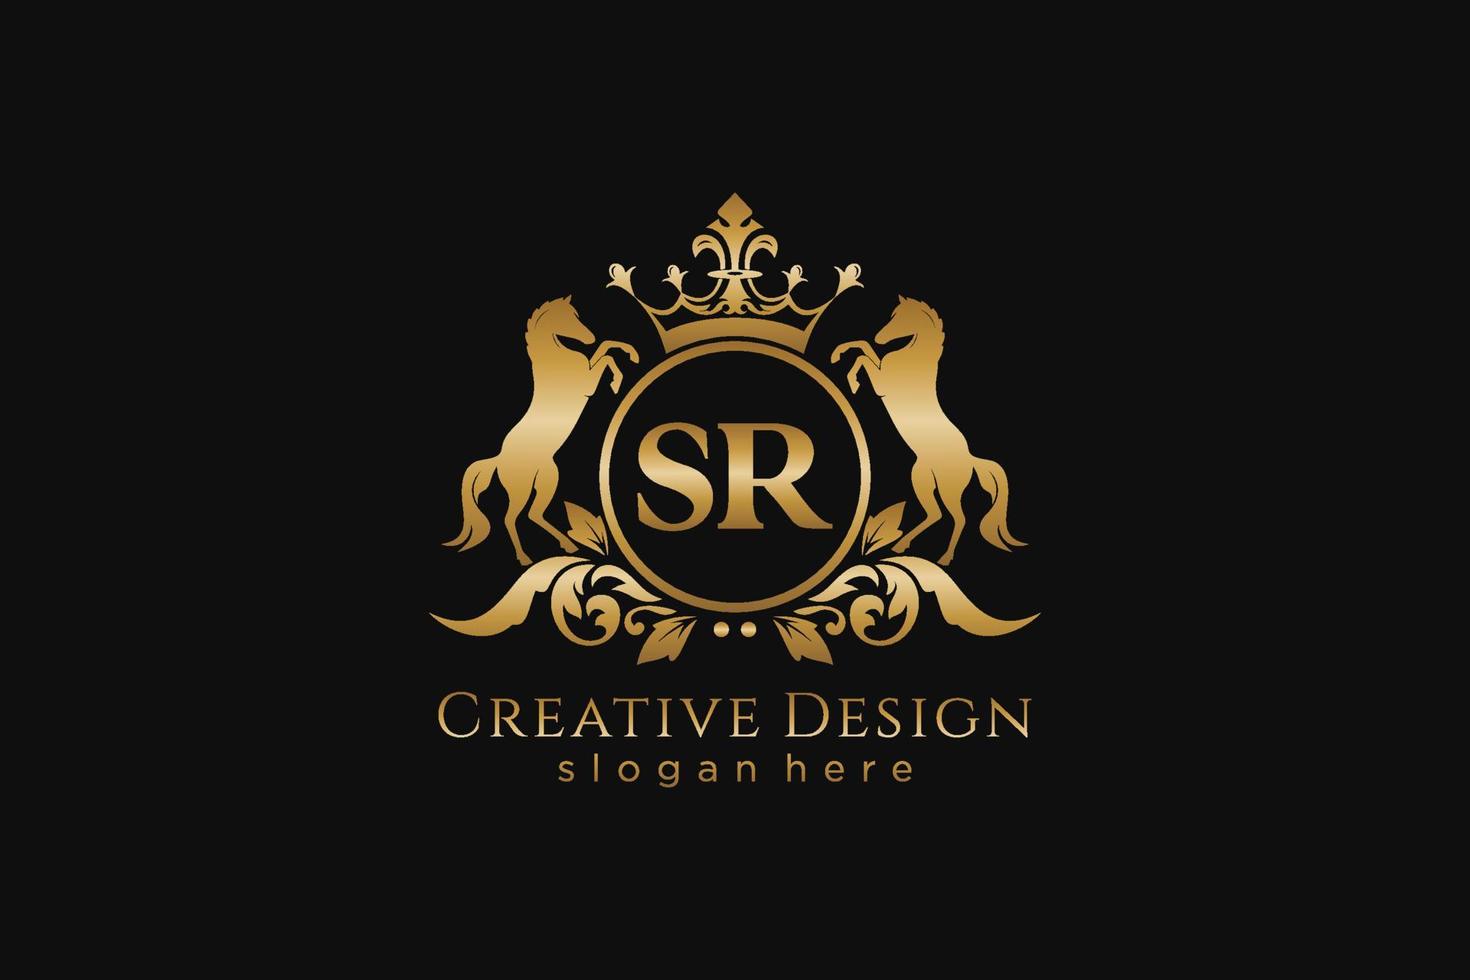 initial SR Retro golden crest with circle and two horses, badge template with scrolls and royal crown - perfect for luxurious branding projects vector